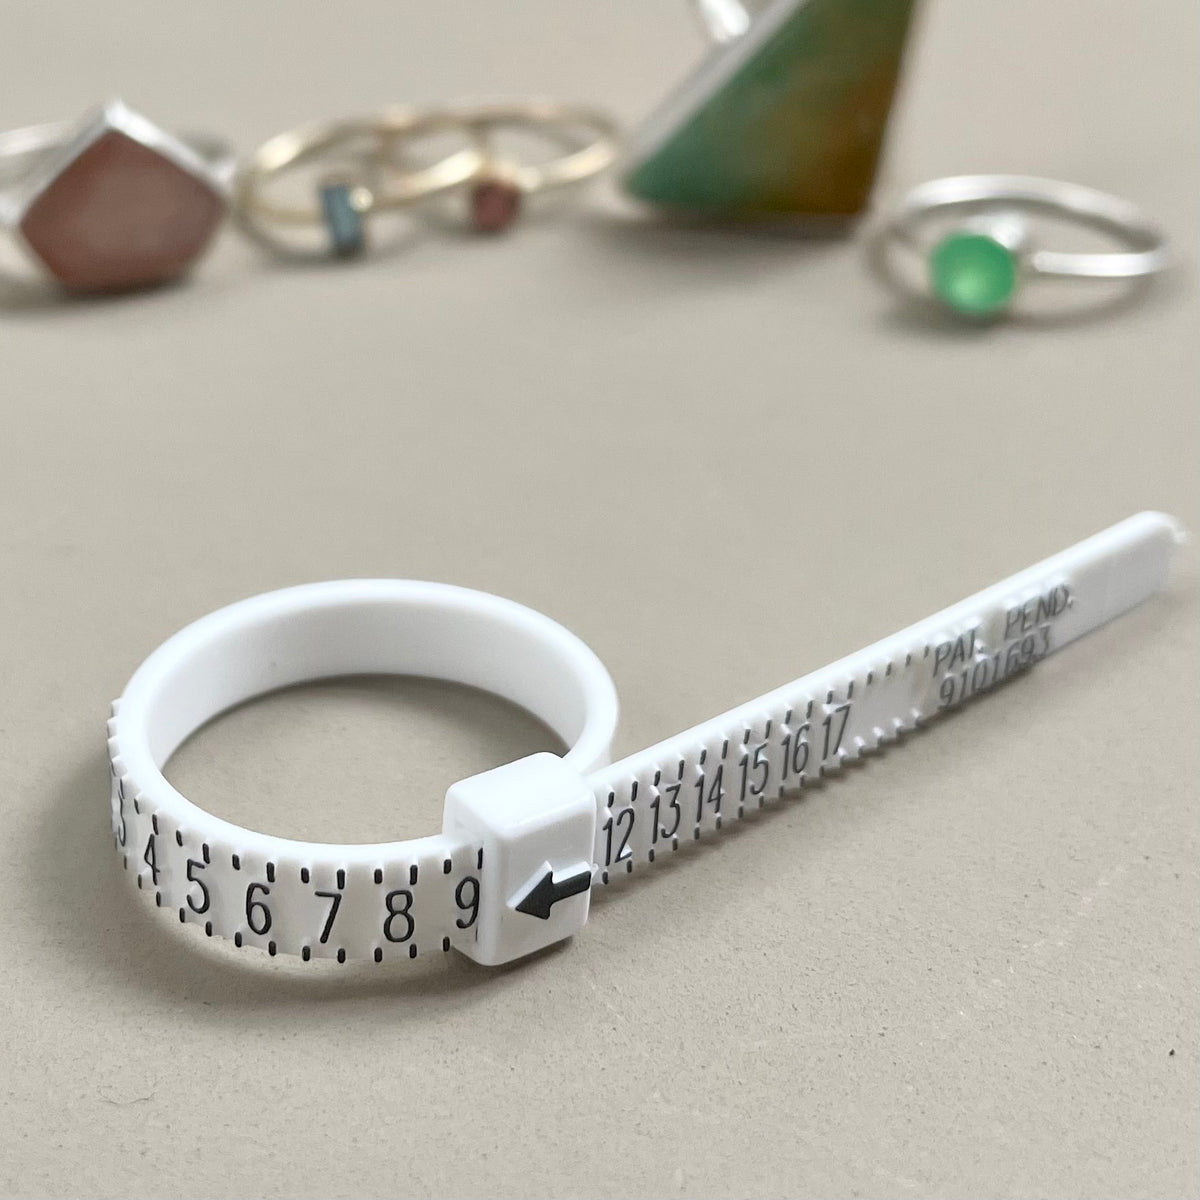 Ring Sizing Tool (free with purchase) – BRITTA AMBAUEN